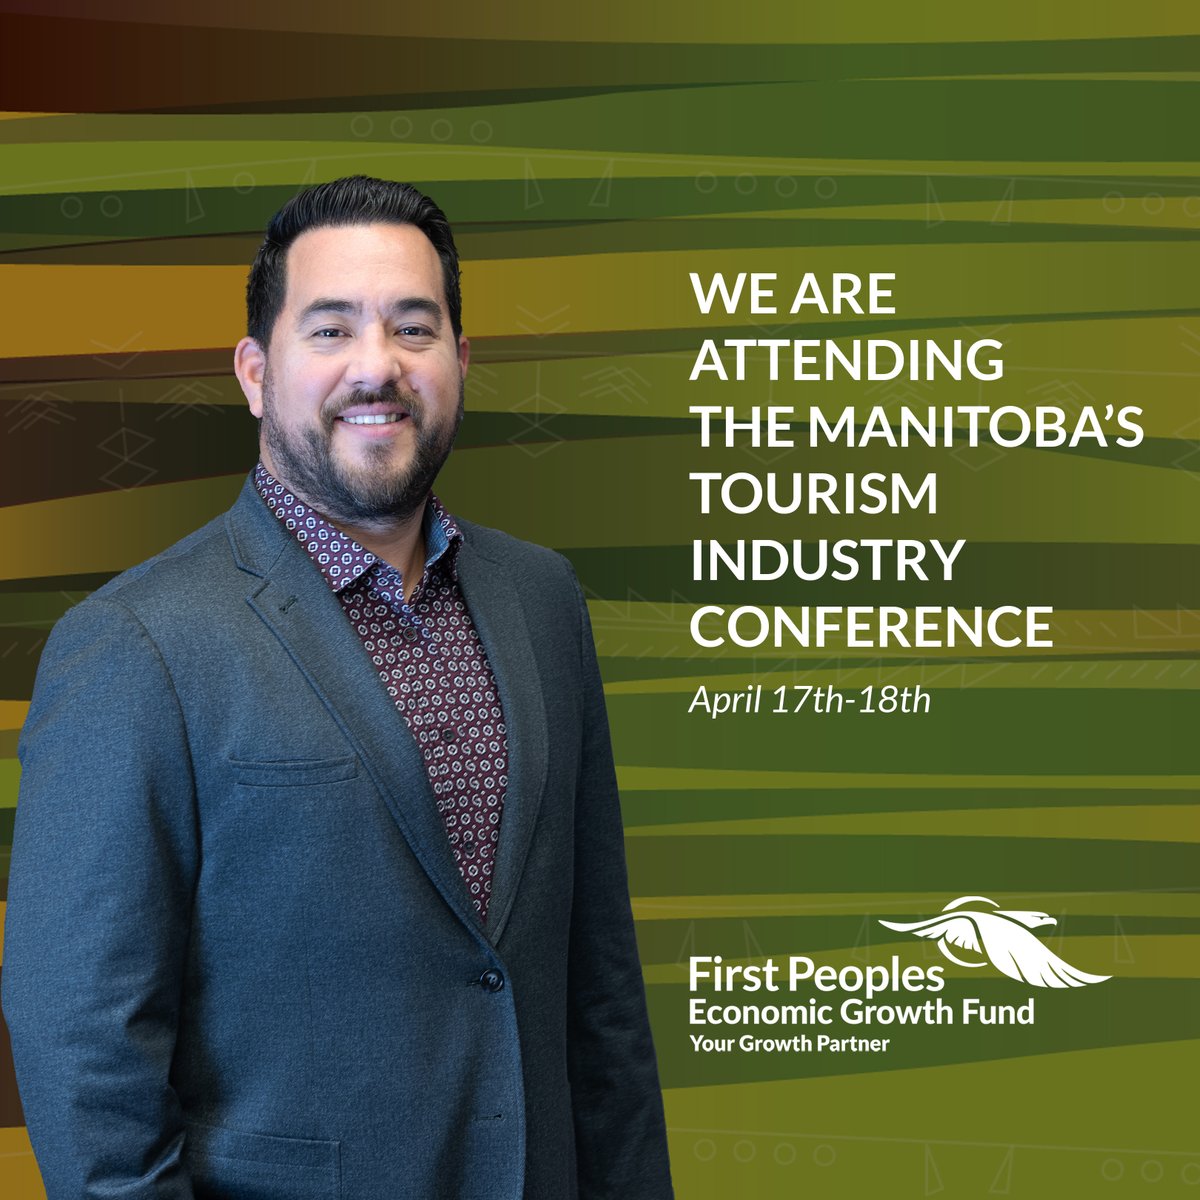 🌟 Exciting News! Our CEO, Fabian Sanderson, is a panelist at Manitoba's Tourism Industry Conference tomorrow, discussing 'In Search of Capital: Funding for Tourism Businesses' alongside industry leaders Sean Barr of PrairiesCan & Joanne MacKean from BDC.

#YourGrowthPartner